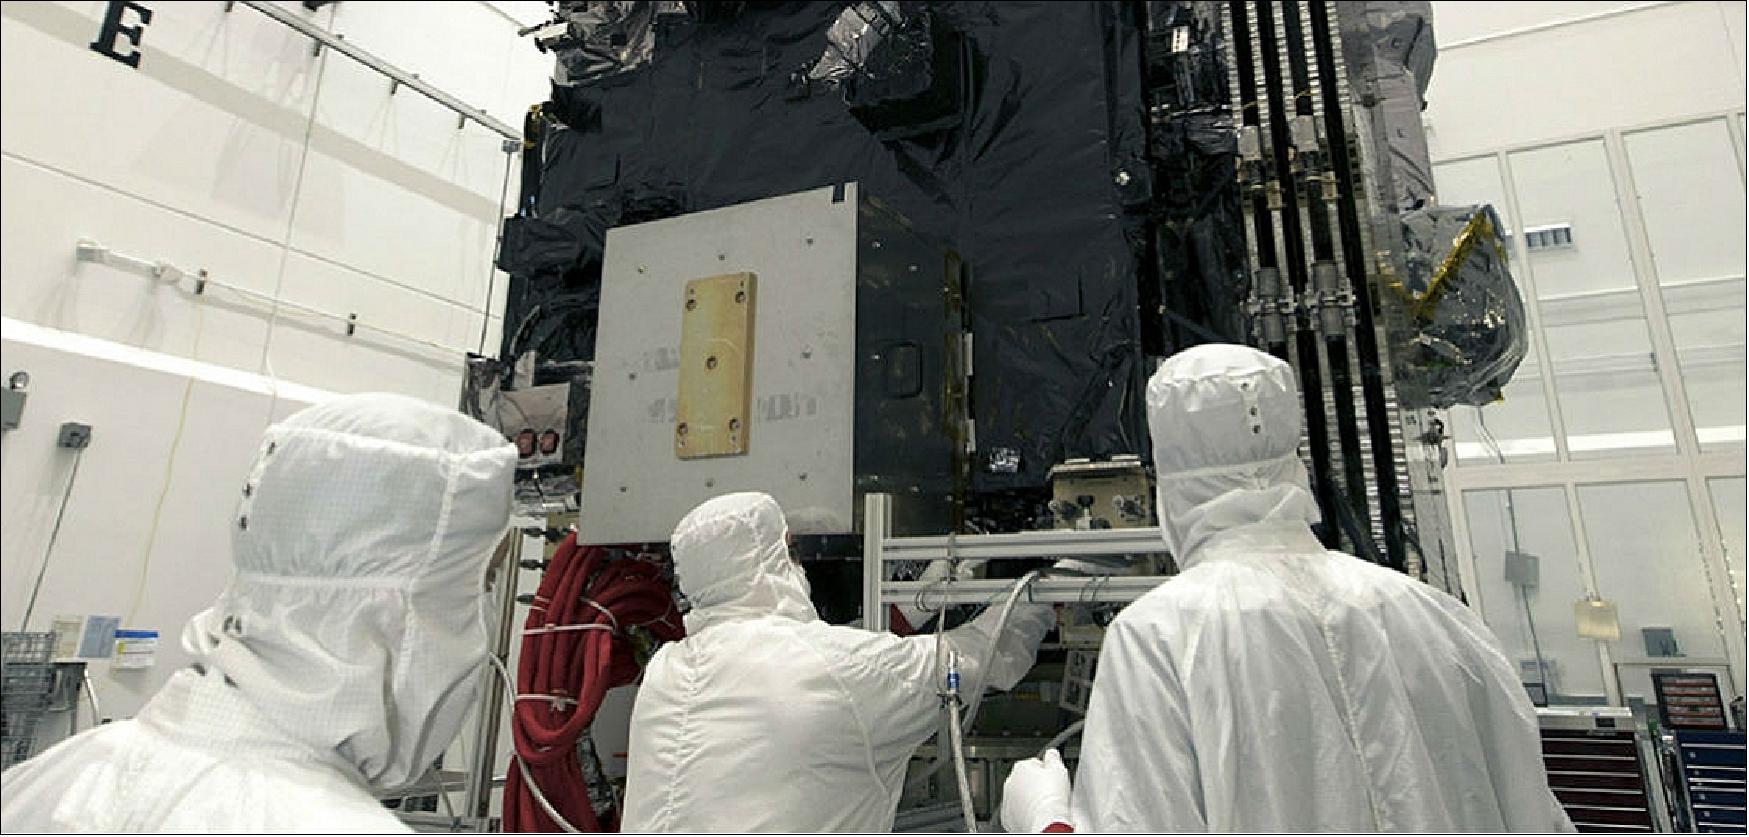 Figure 12: Inspection of the GOES-S spacecraft, the second in NOAA's series of next-generation geostationary weather satellites (image credit: NOAA)